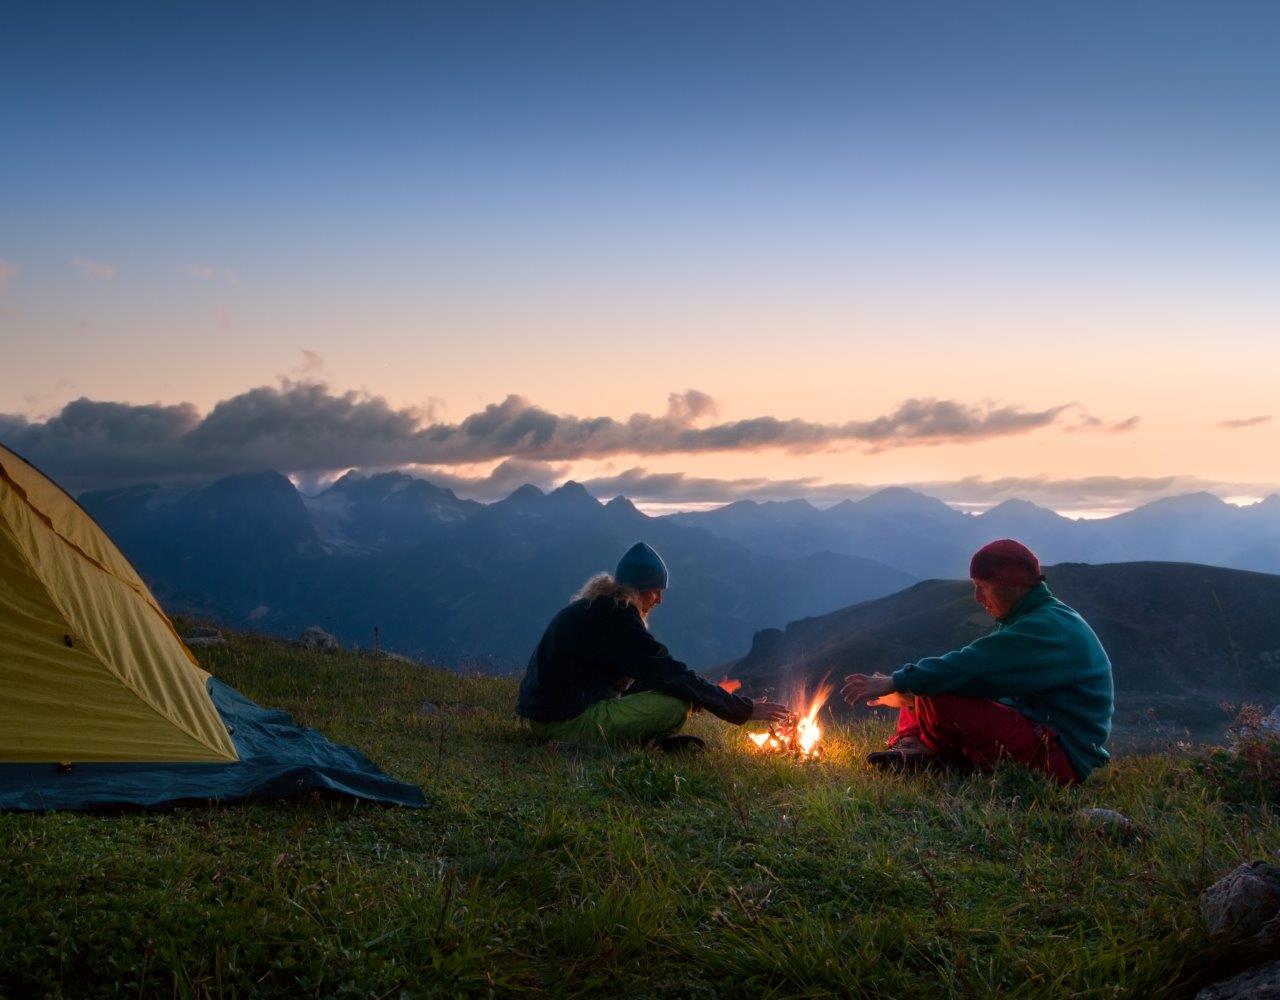 Two people tent camping in the mountains at night with a campfire